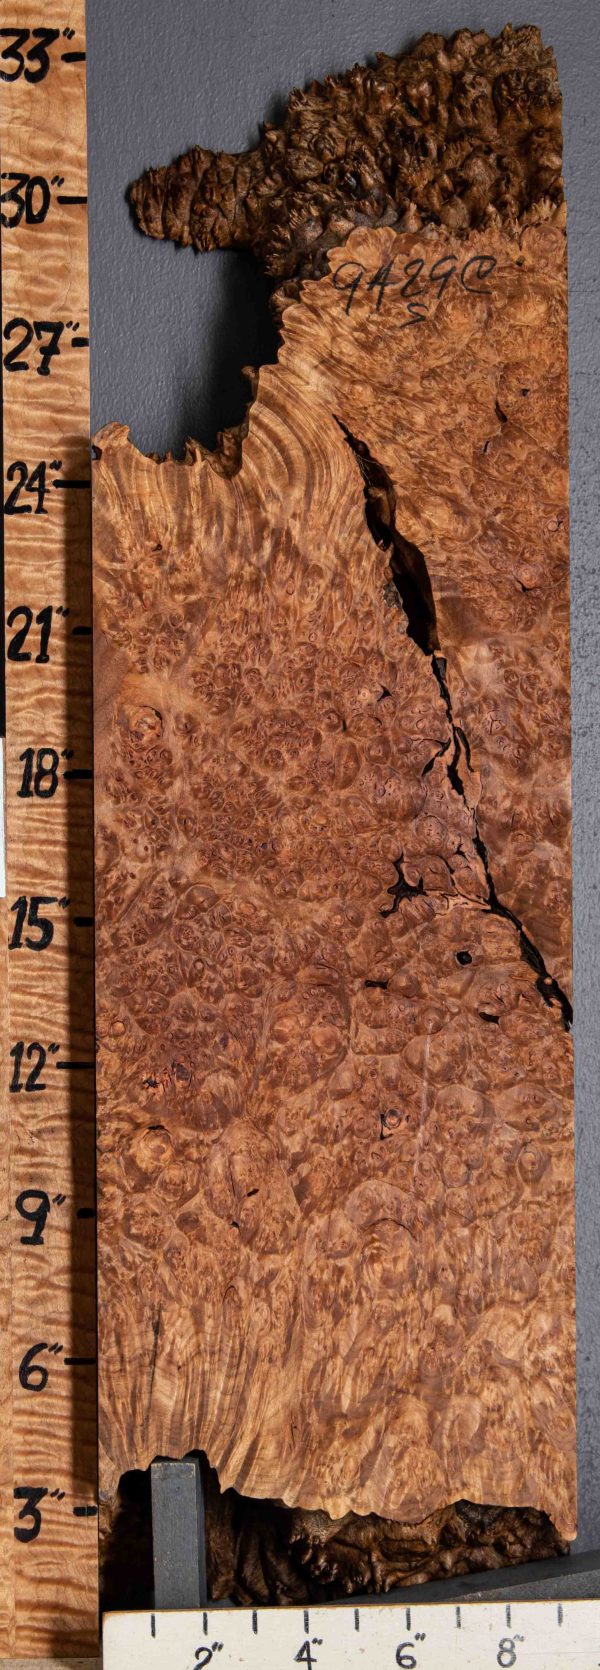 5A Spalted Burl Maple Block with Live Edge 9"3/4 X 34" X 3"3/4 (NWT-9429C)